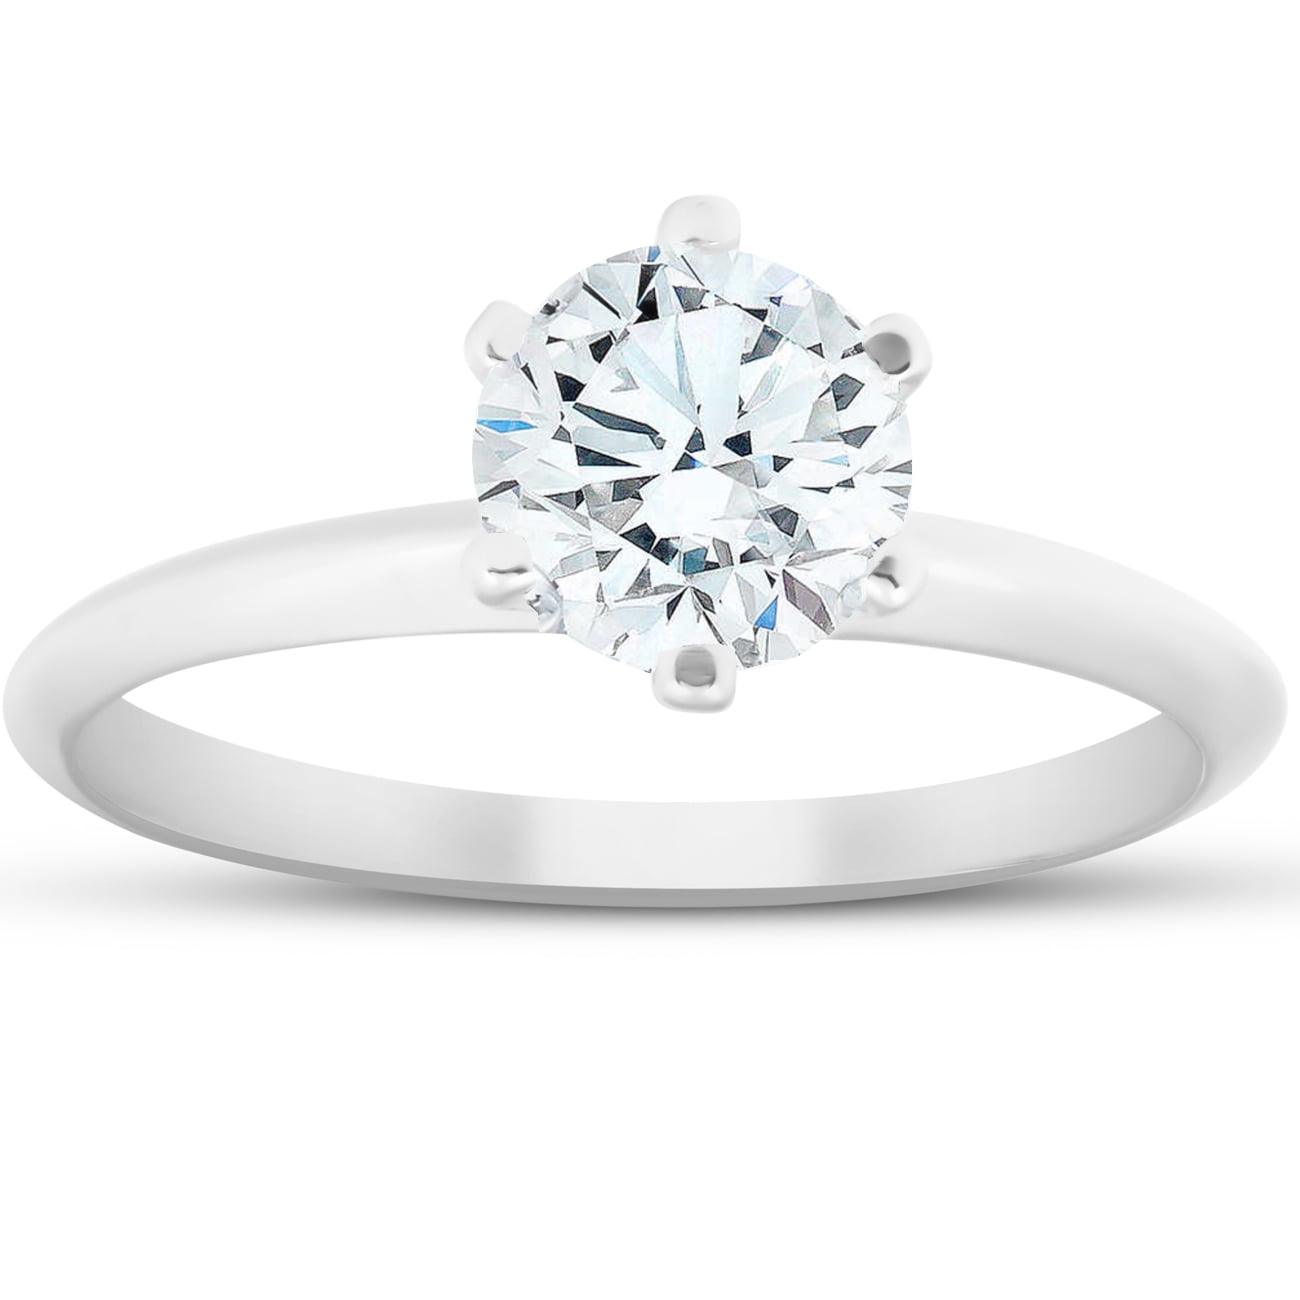 Engagement Ring Diamond Round Cut Solitaire Size 5 In 18k White Gold Finish 1ct 